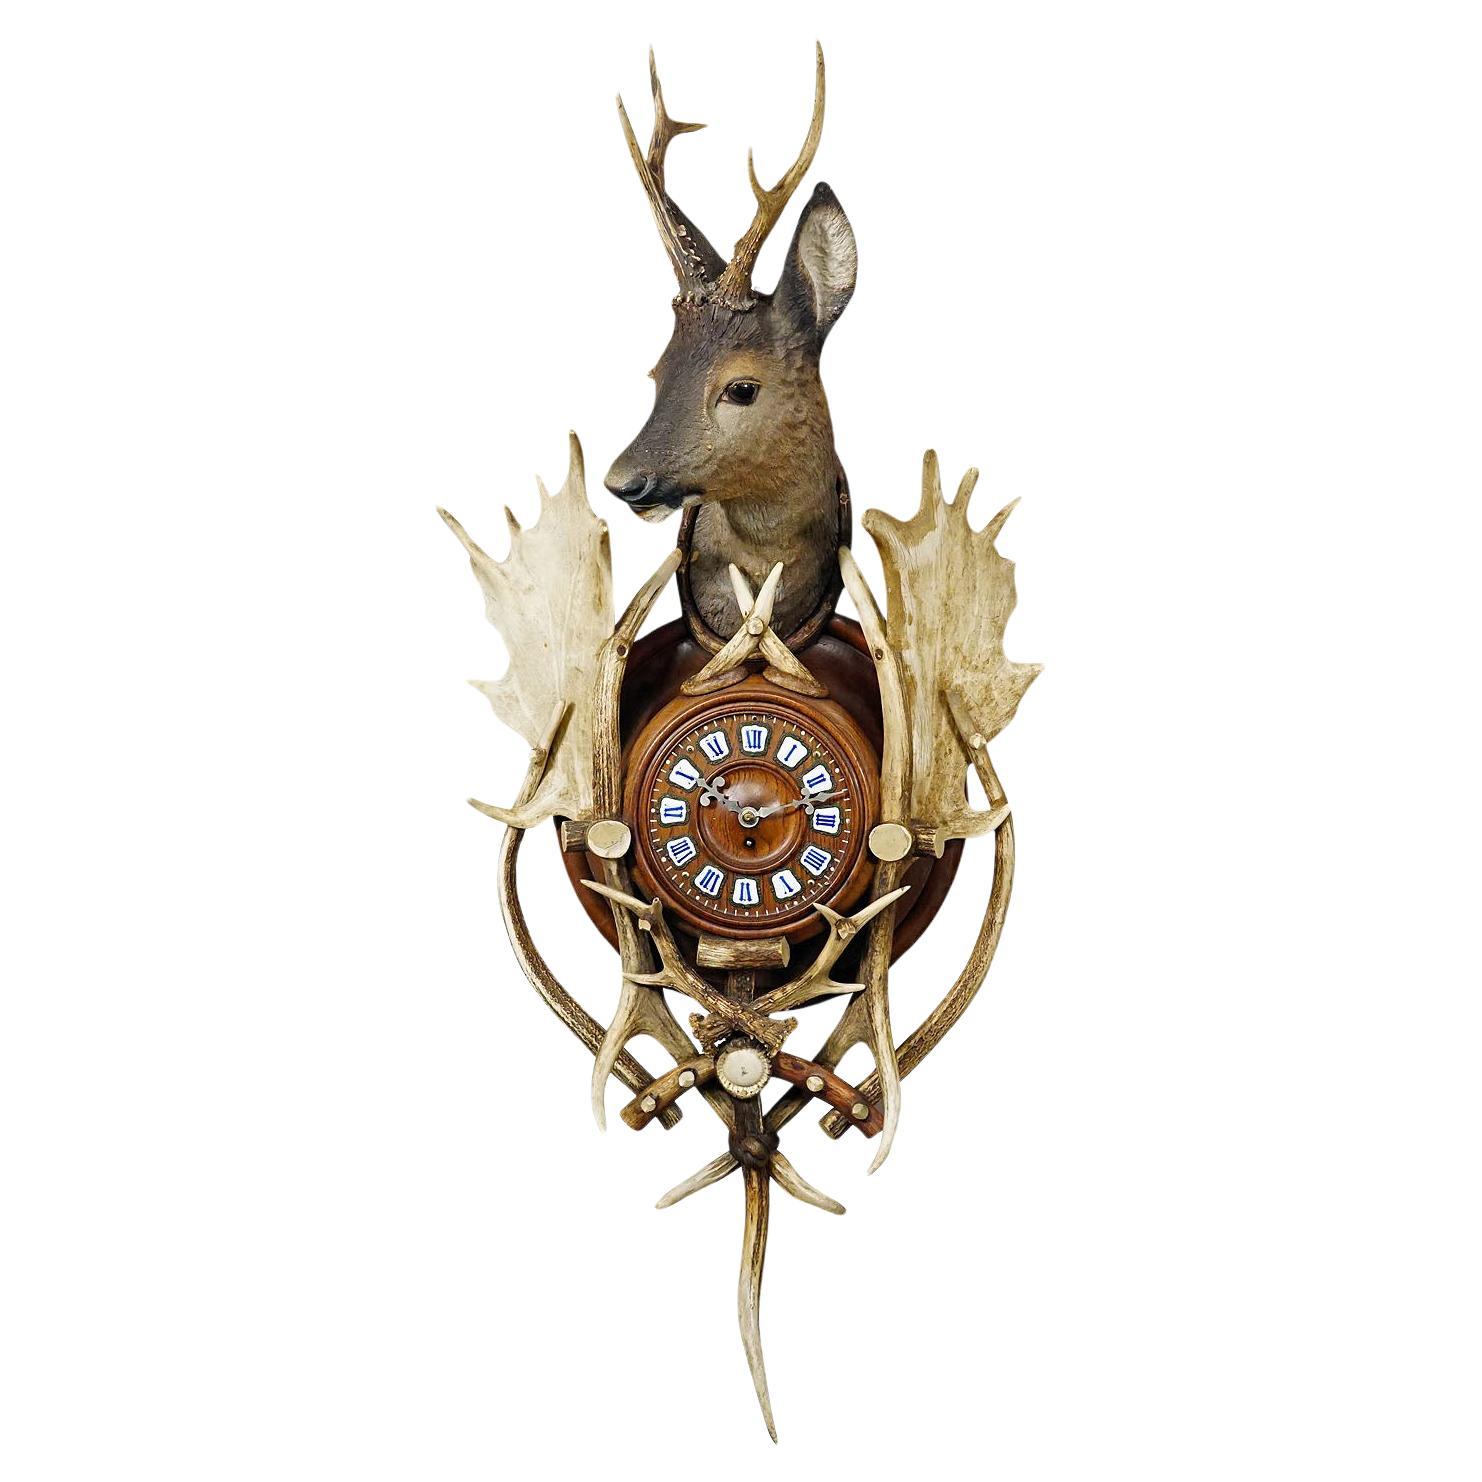 Antique Cabin Antler Wall Clock with Deer Head Austria ca. 1900 For Sale